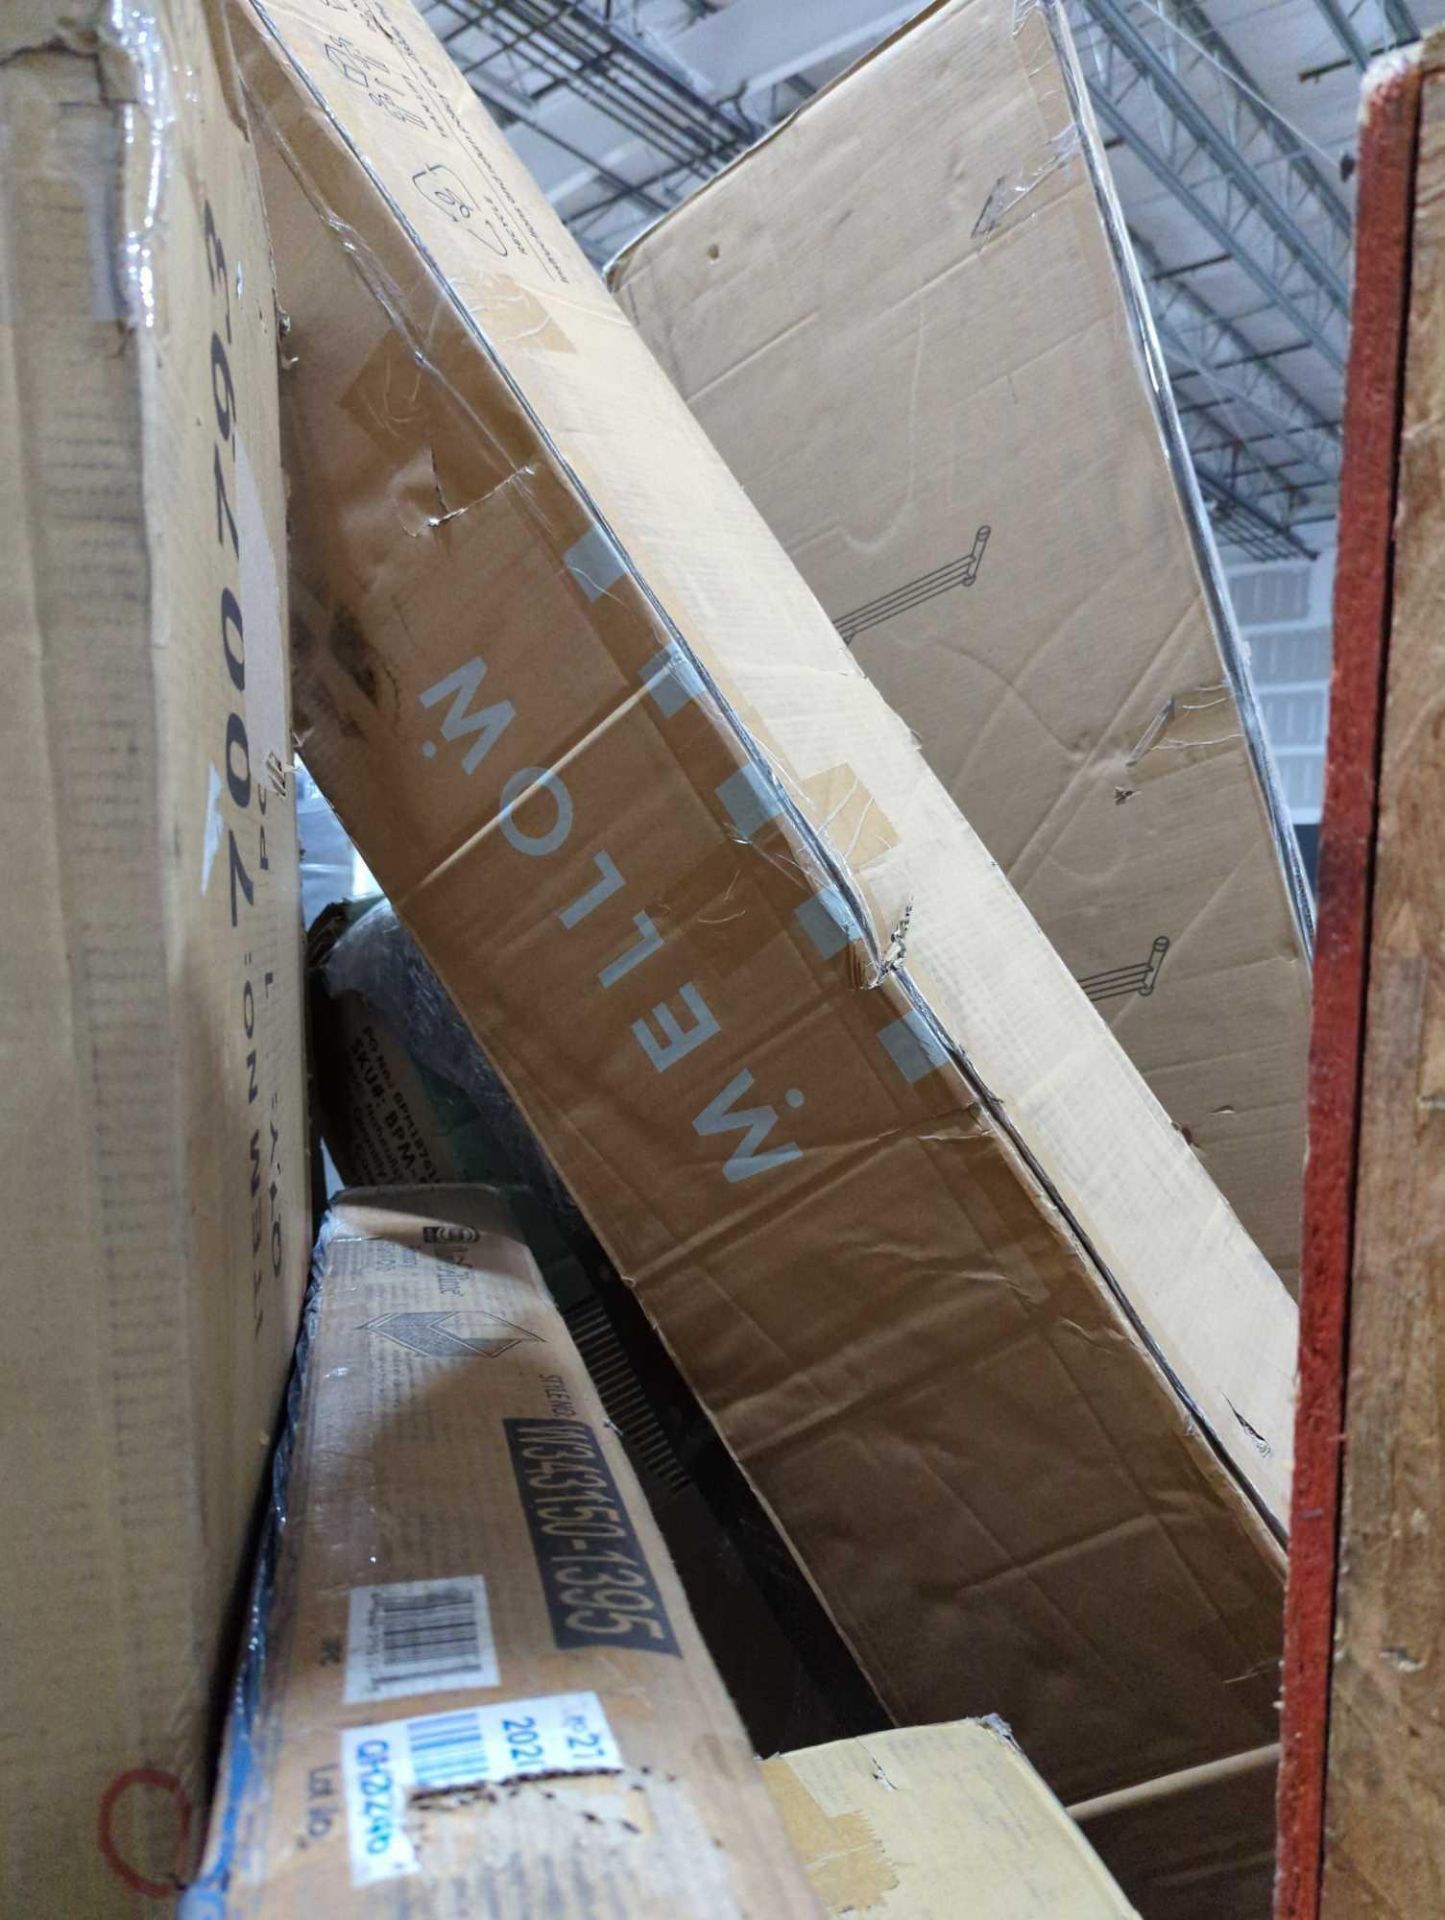 Two Pallets - Image 11 of 12